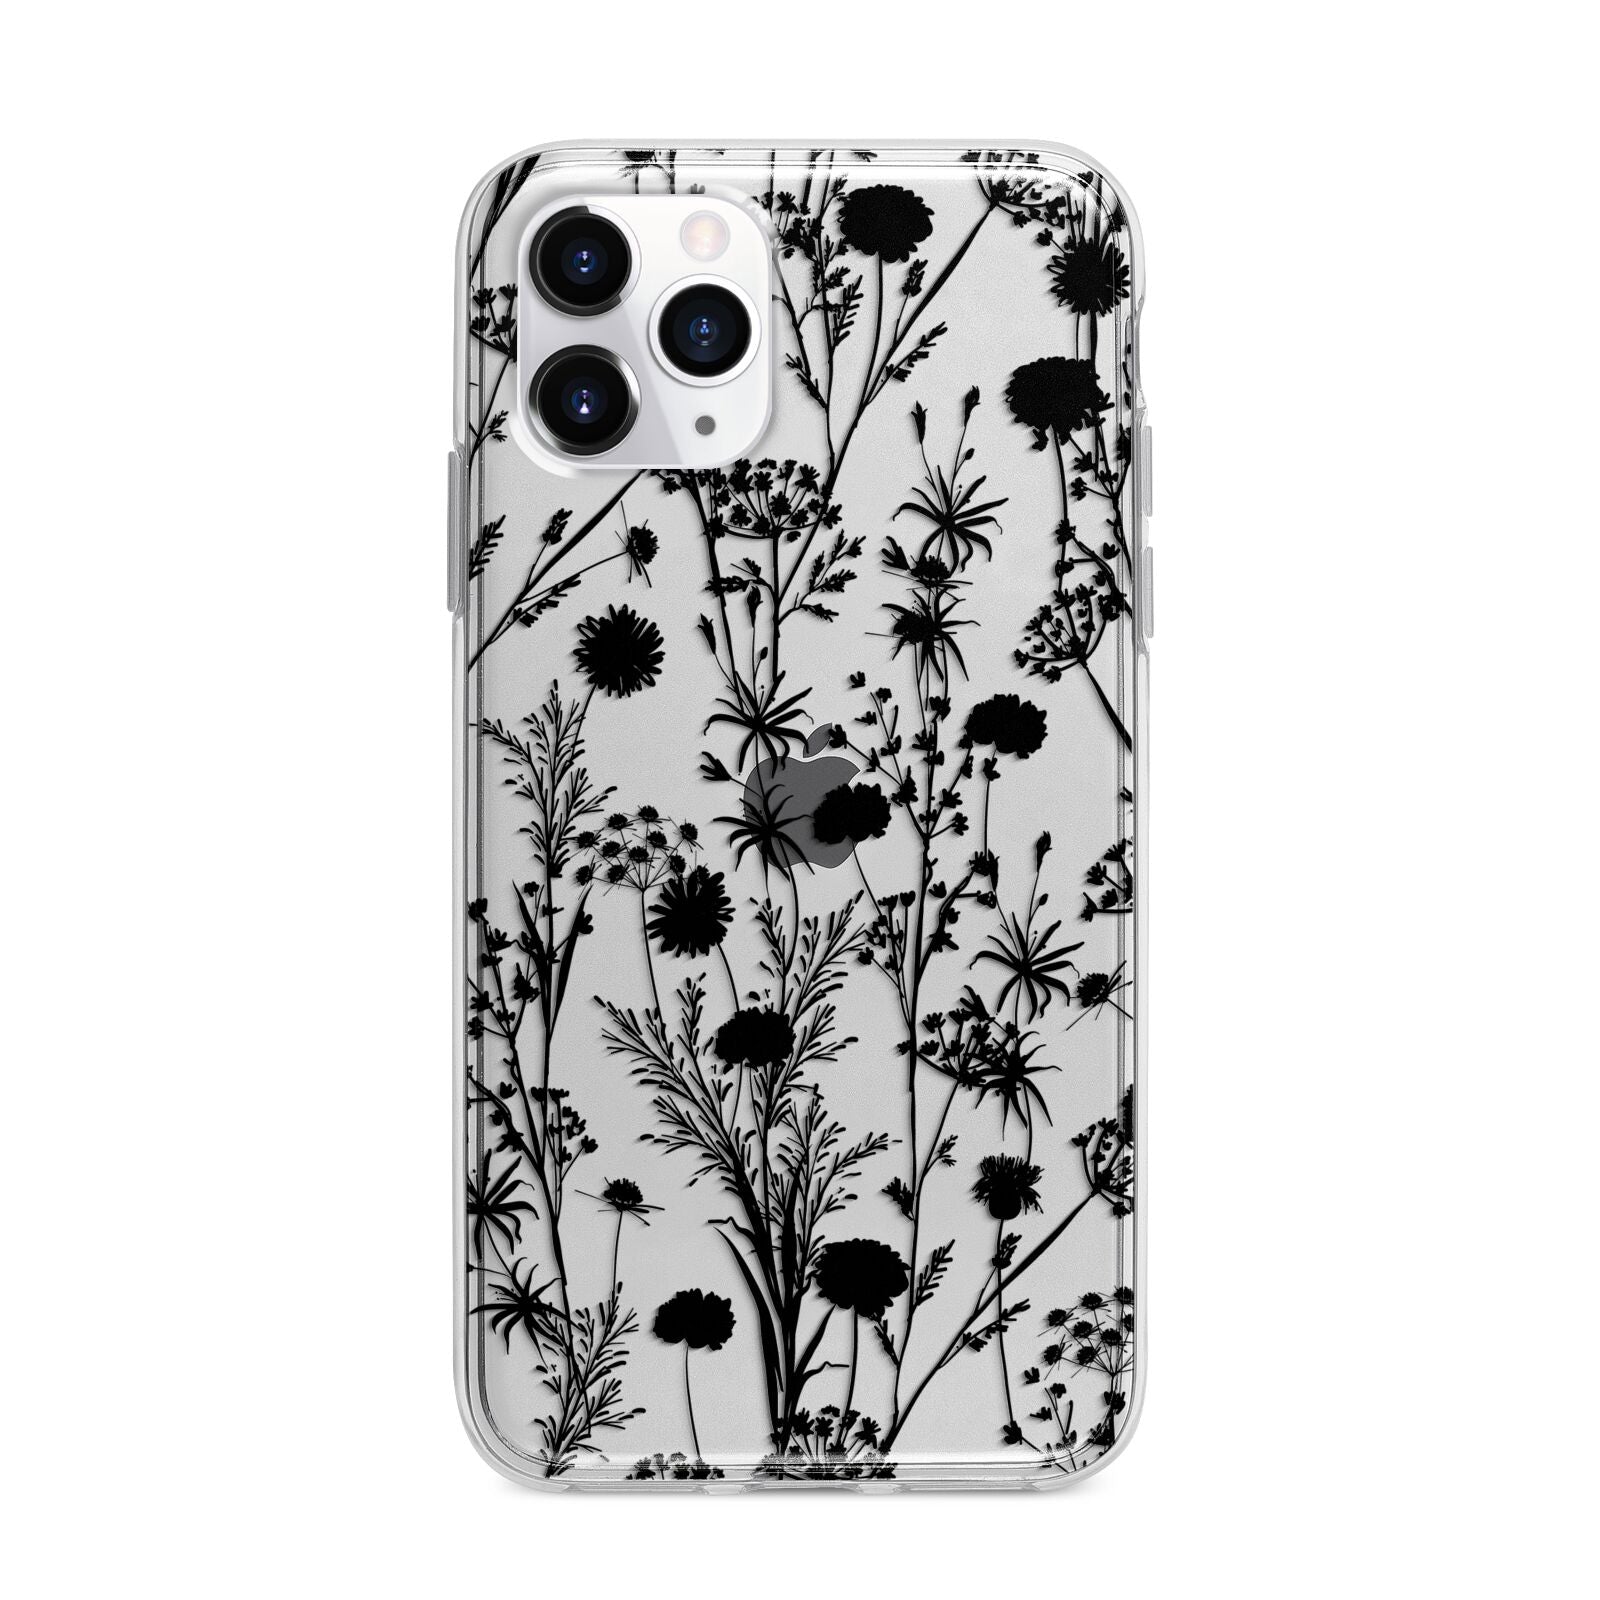 Black Floral Meadow Apple iPhone 11 Pro Max in Silver with Bumper Case